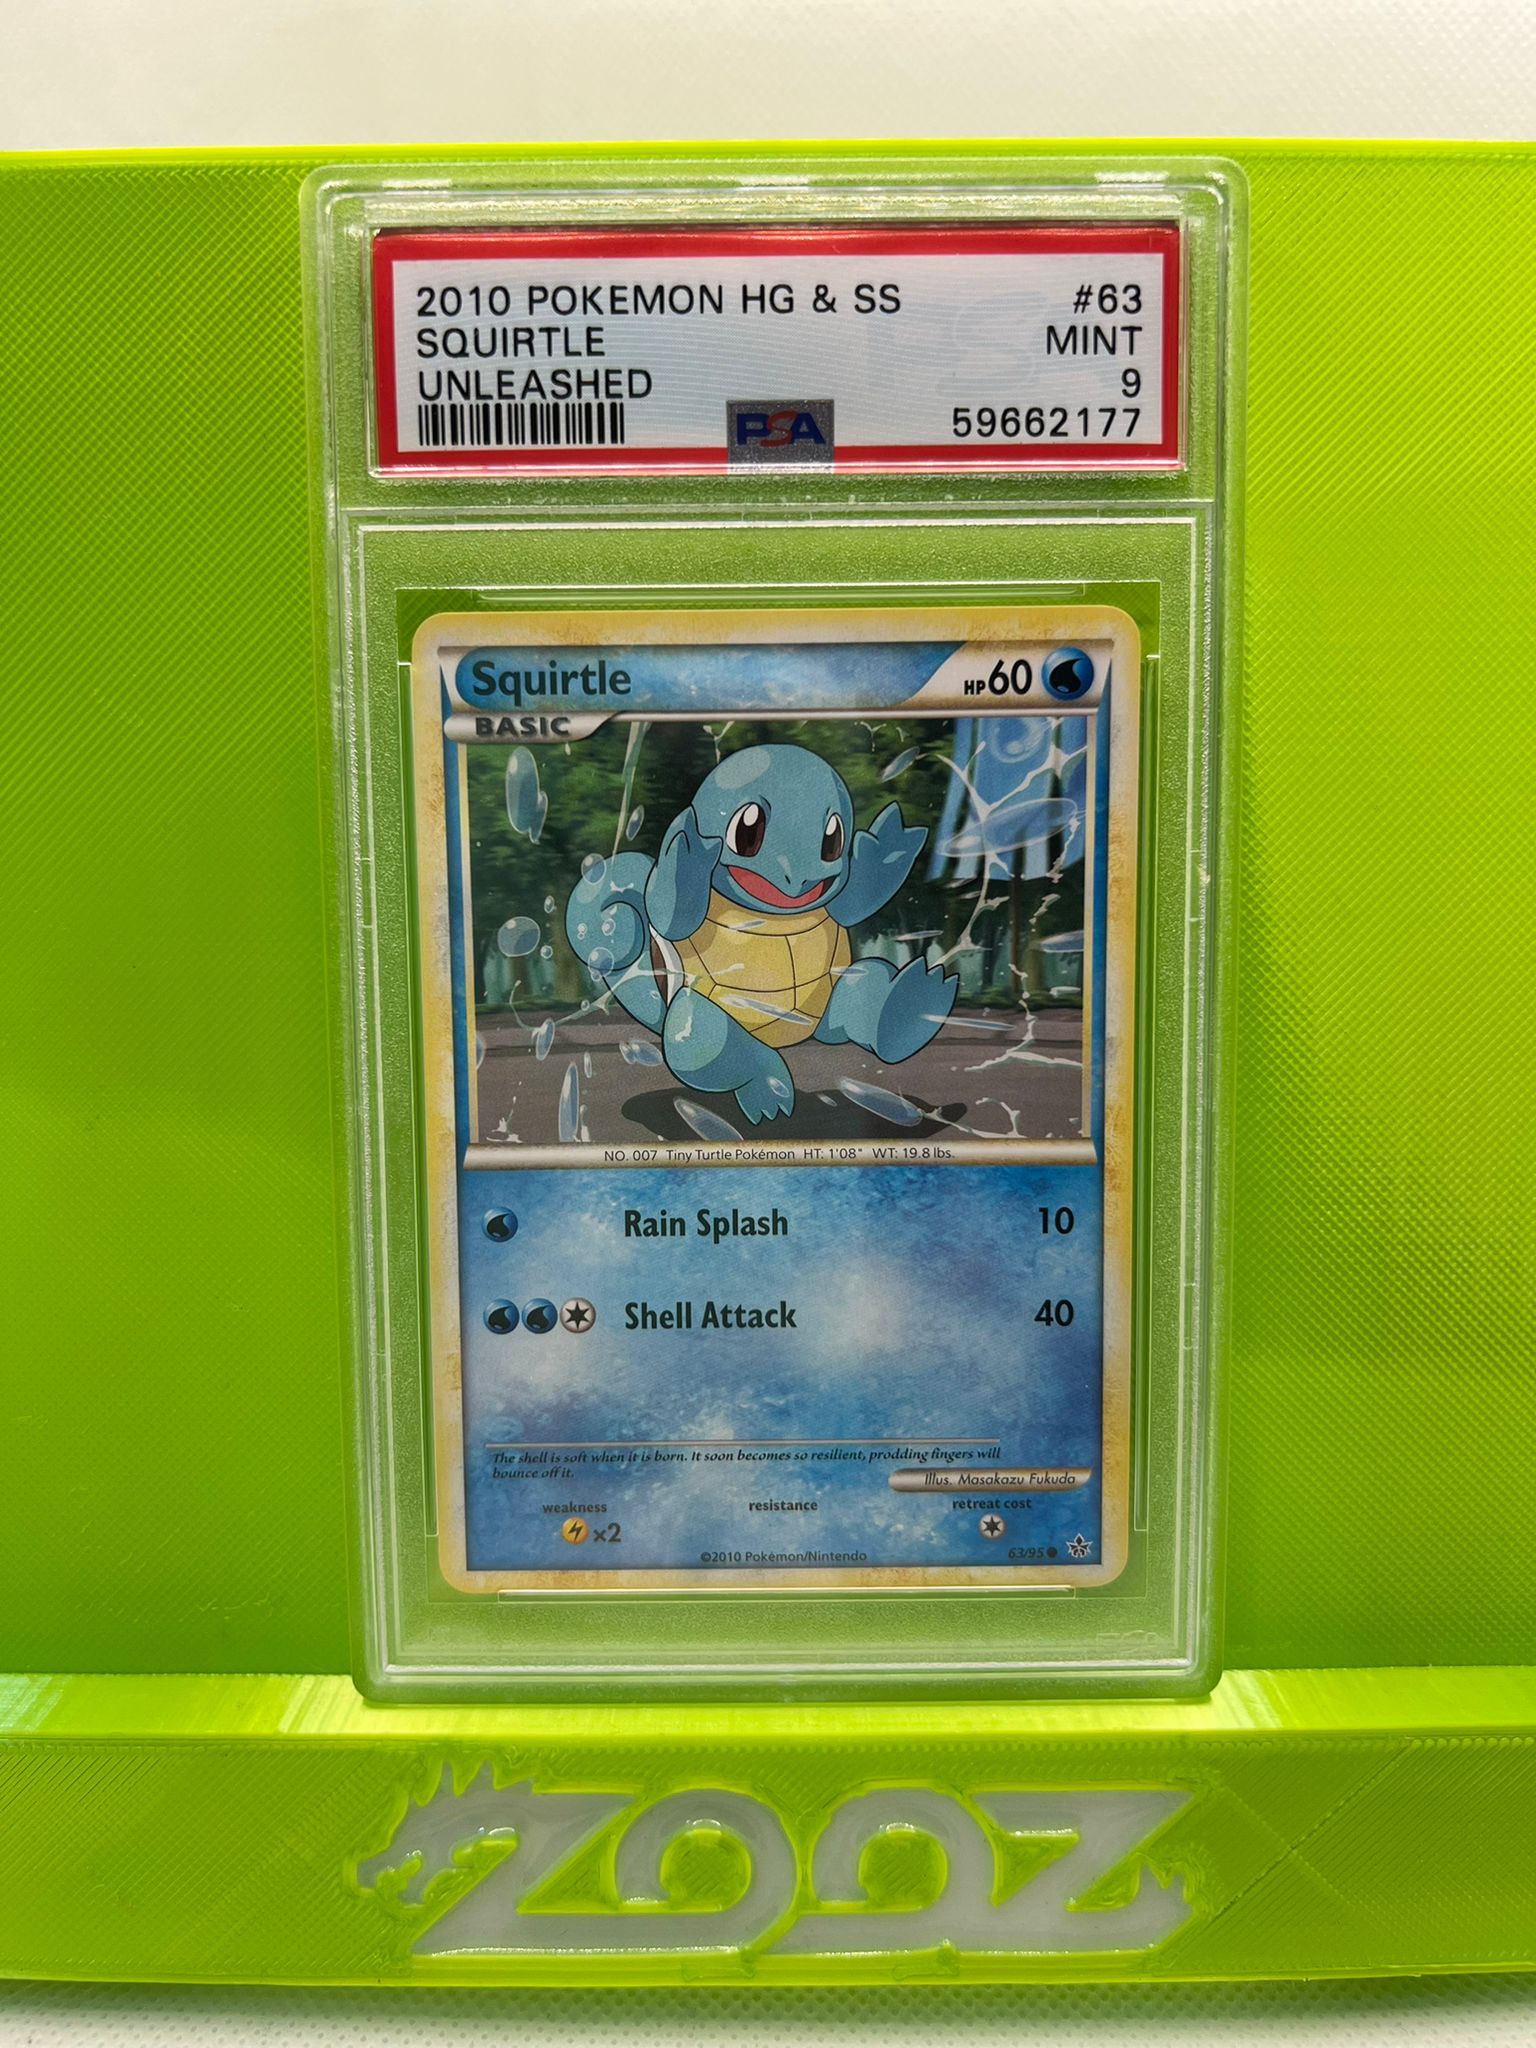 PSA 9 Pokemon Squirtle #63 Heart Gold & Soul Silver Unleashed Non Holo